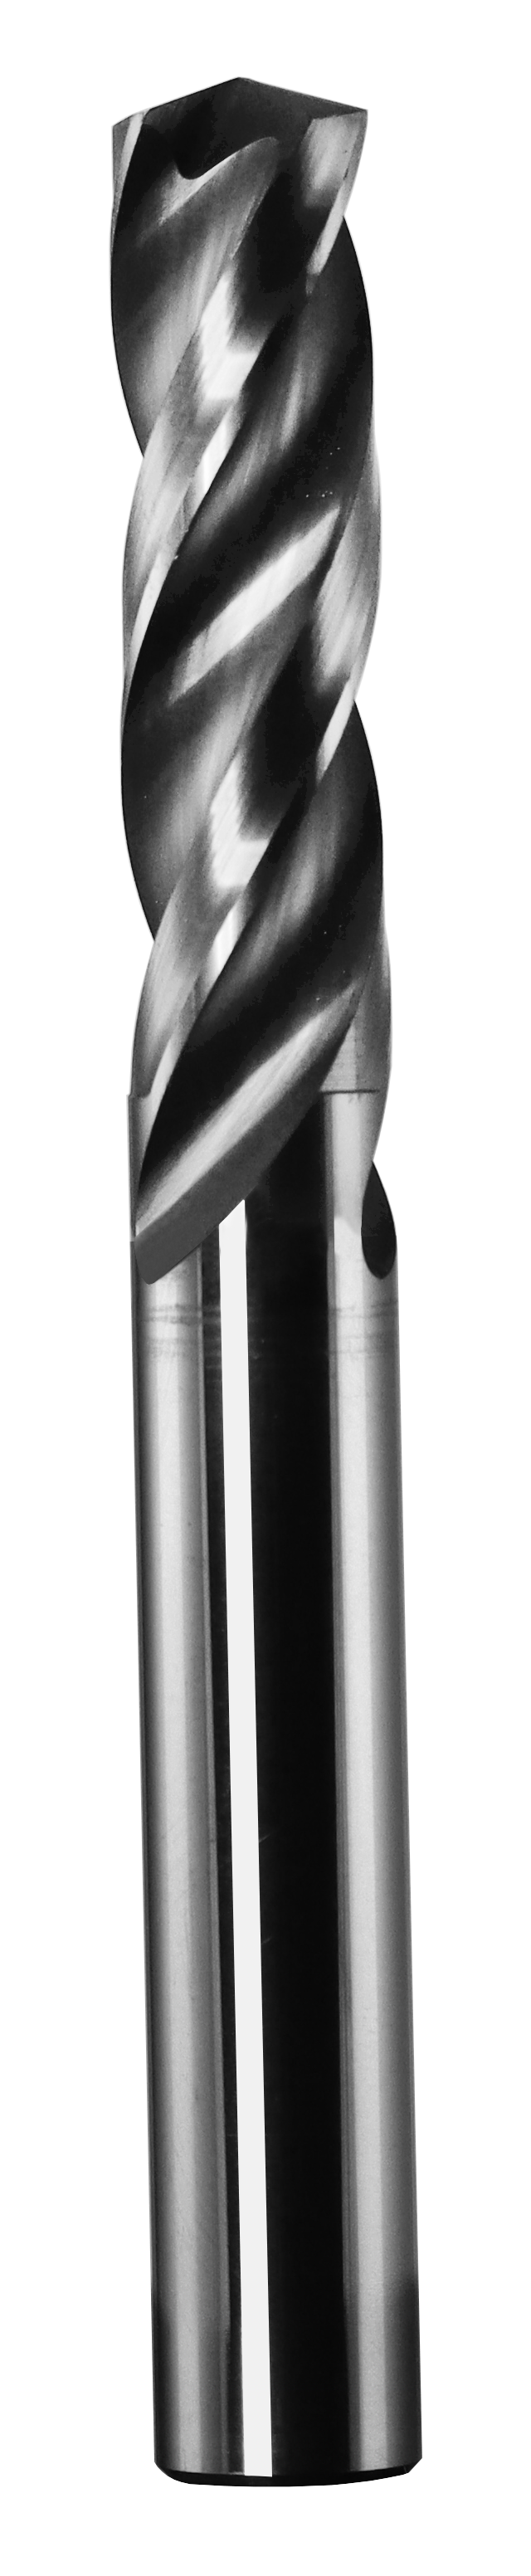 10.50mm Dia, 150 Degree Point, Solid Carbide Drill - 63029